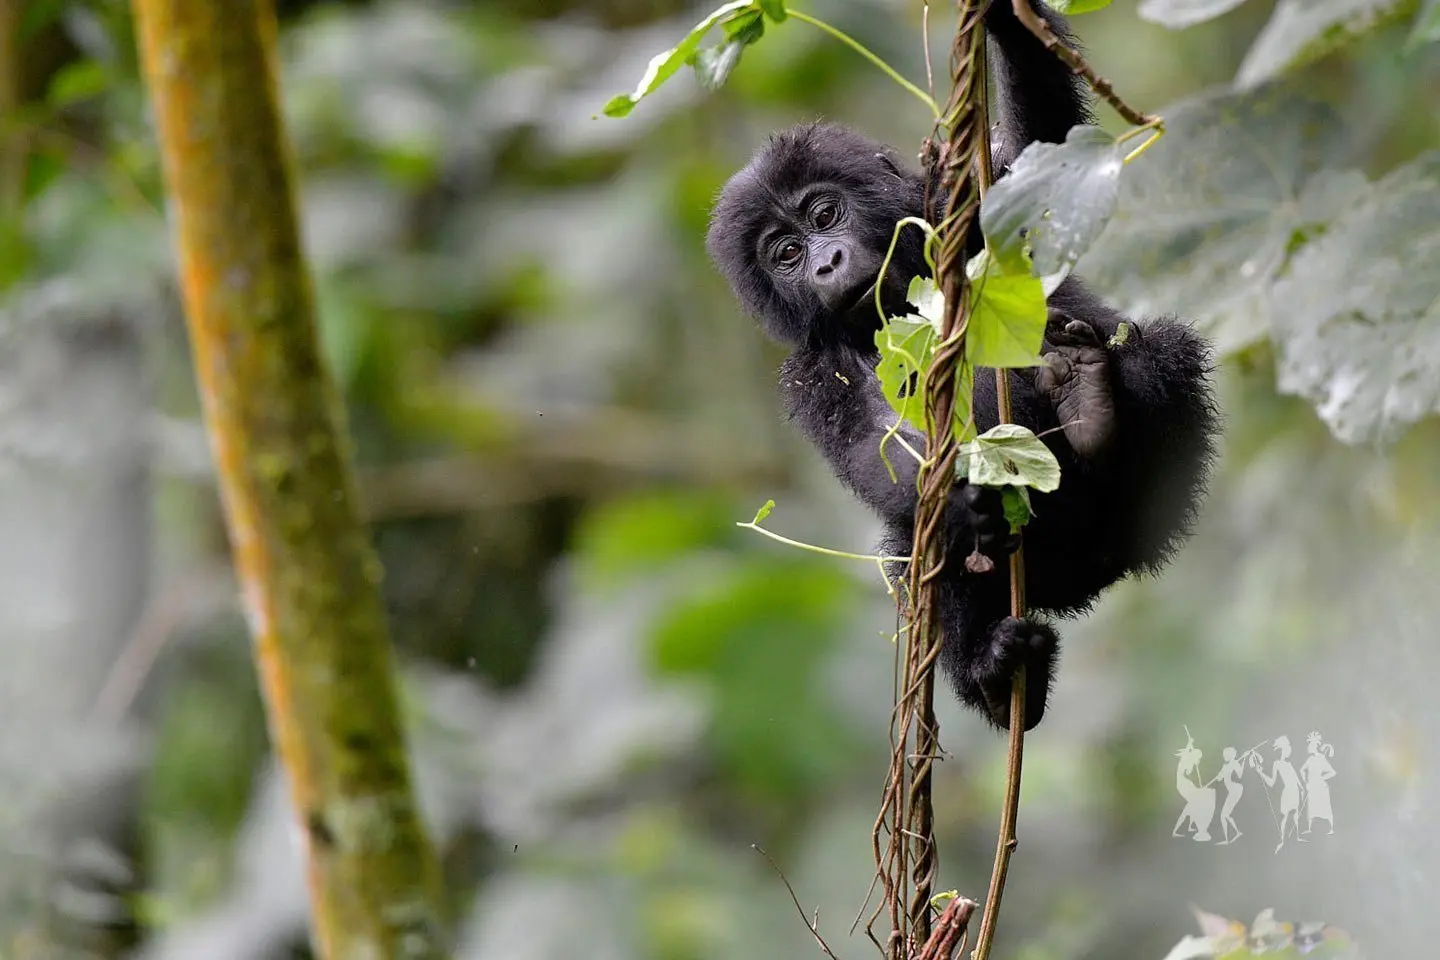 Young gorilla climbing in Bwindi Impenetrable Forest